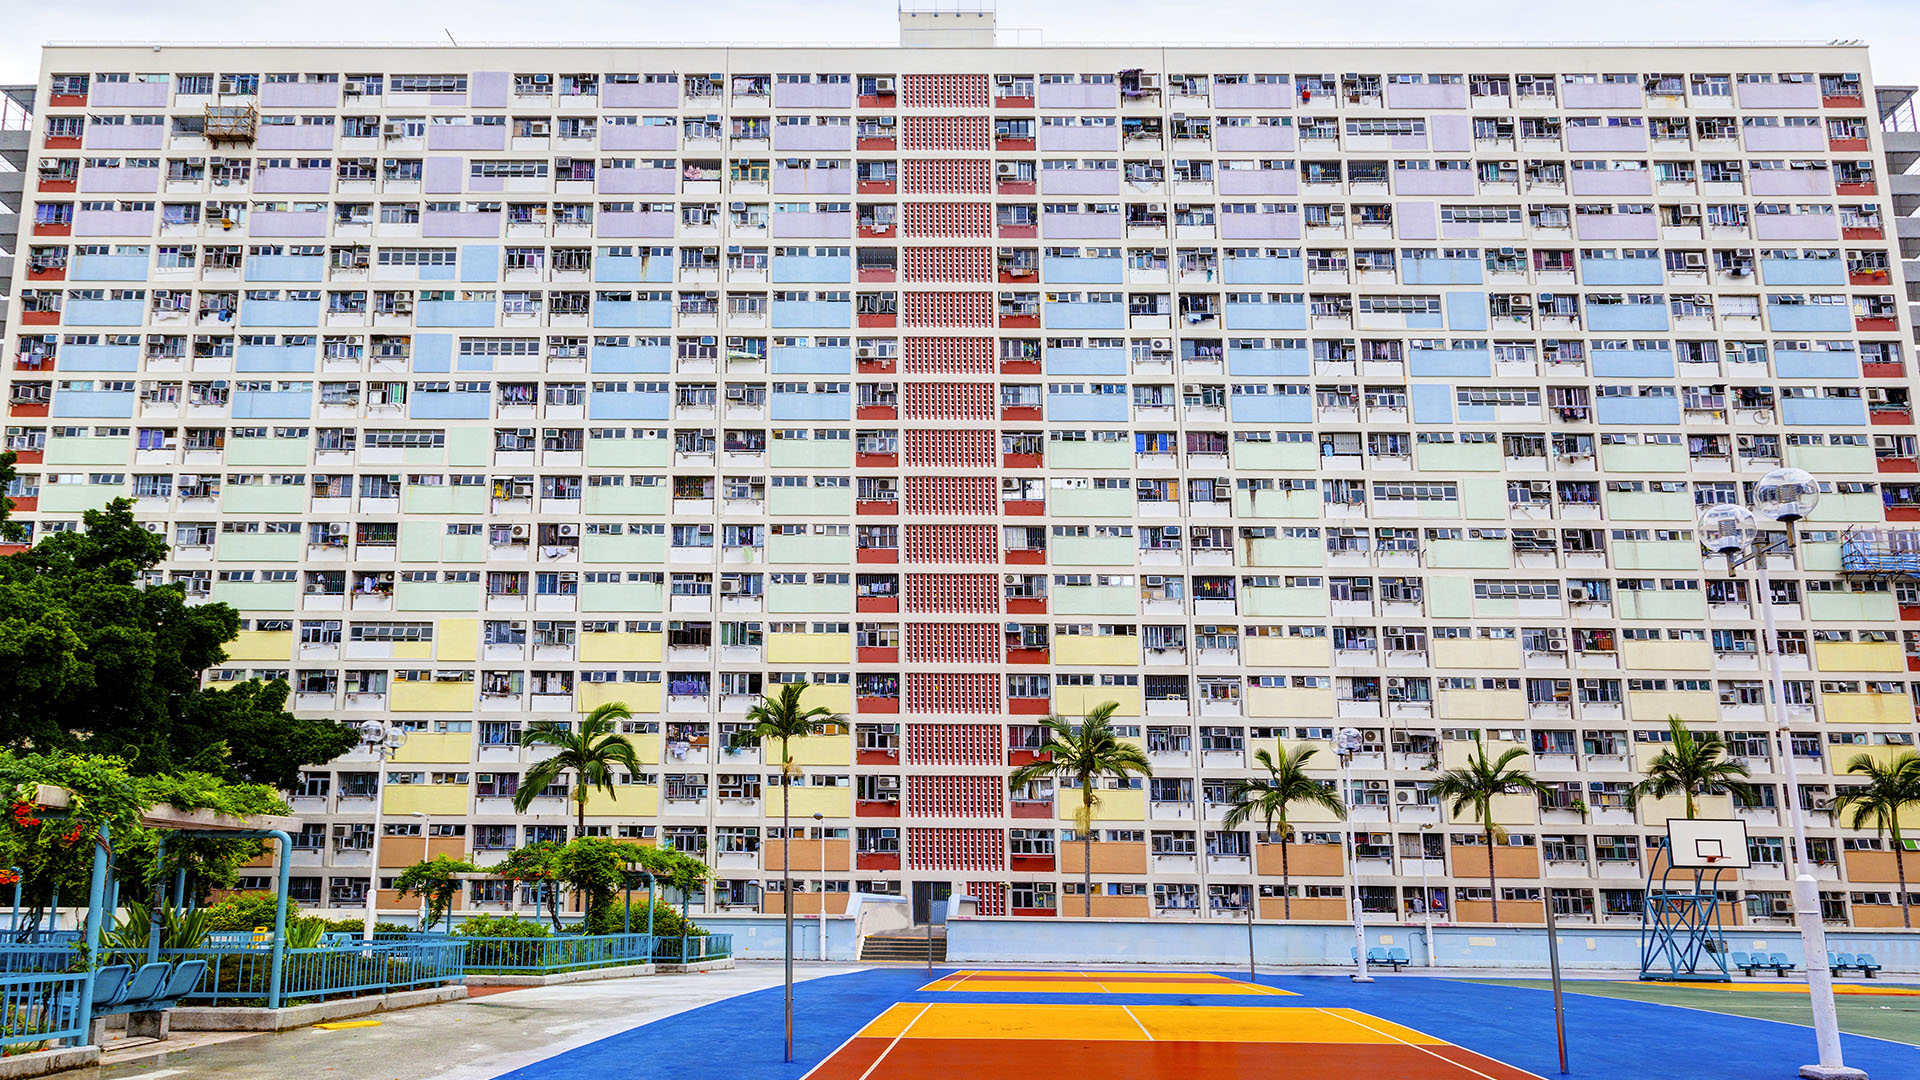 Basketball court in front of colourful apartment building